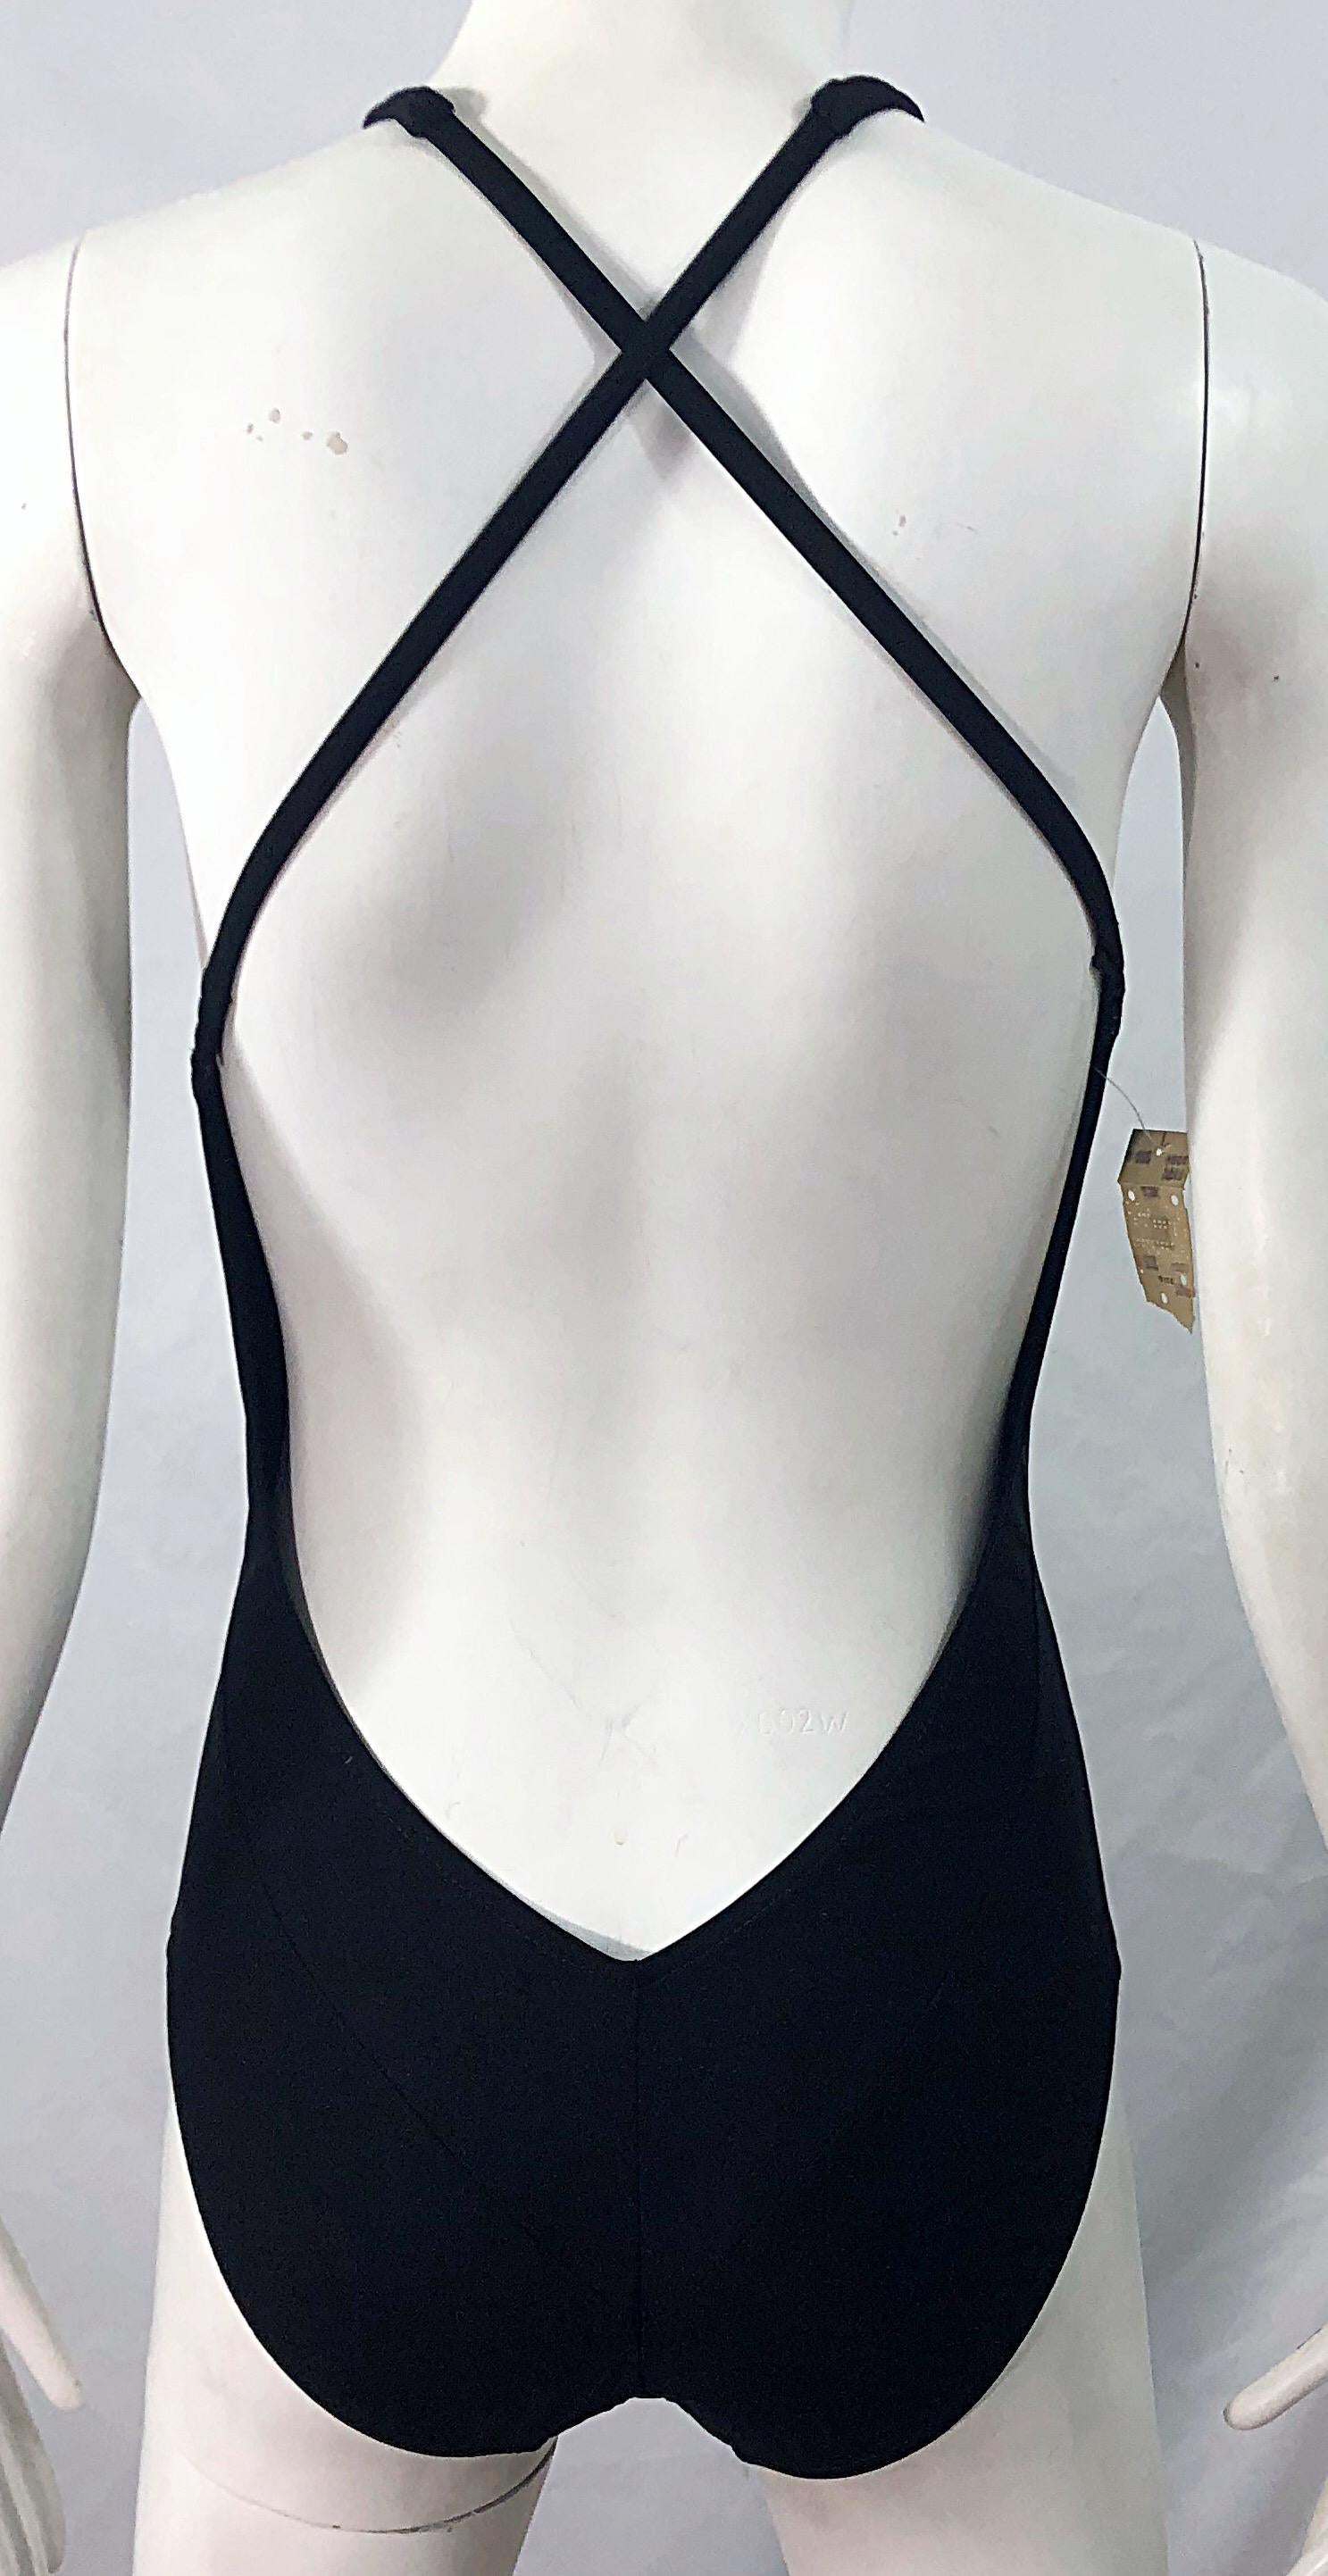 NWT Bob Mackie Late 1970s Black Sexy Cut Out One Piece Vintage Swimsuit Bodysuit 5